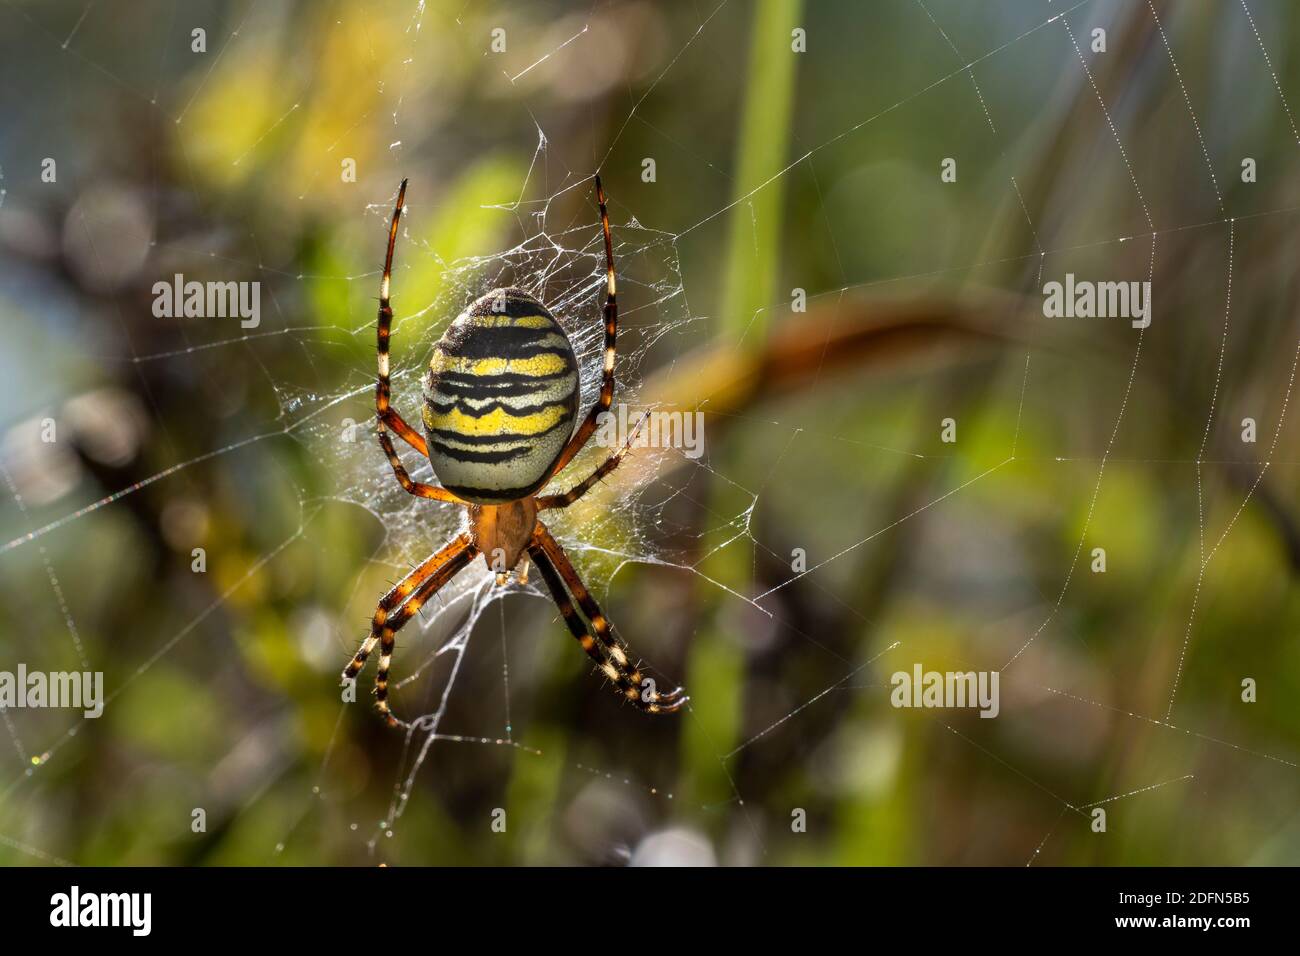 Zebraspinne High Resolution Stock Photography and Images - Alamy